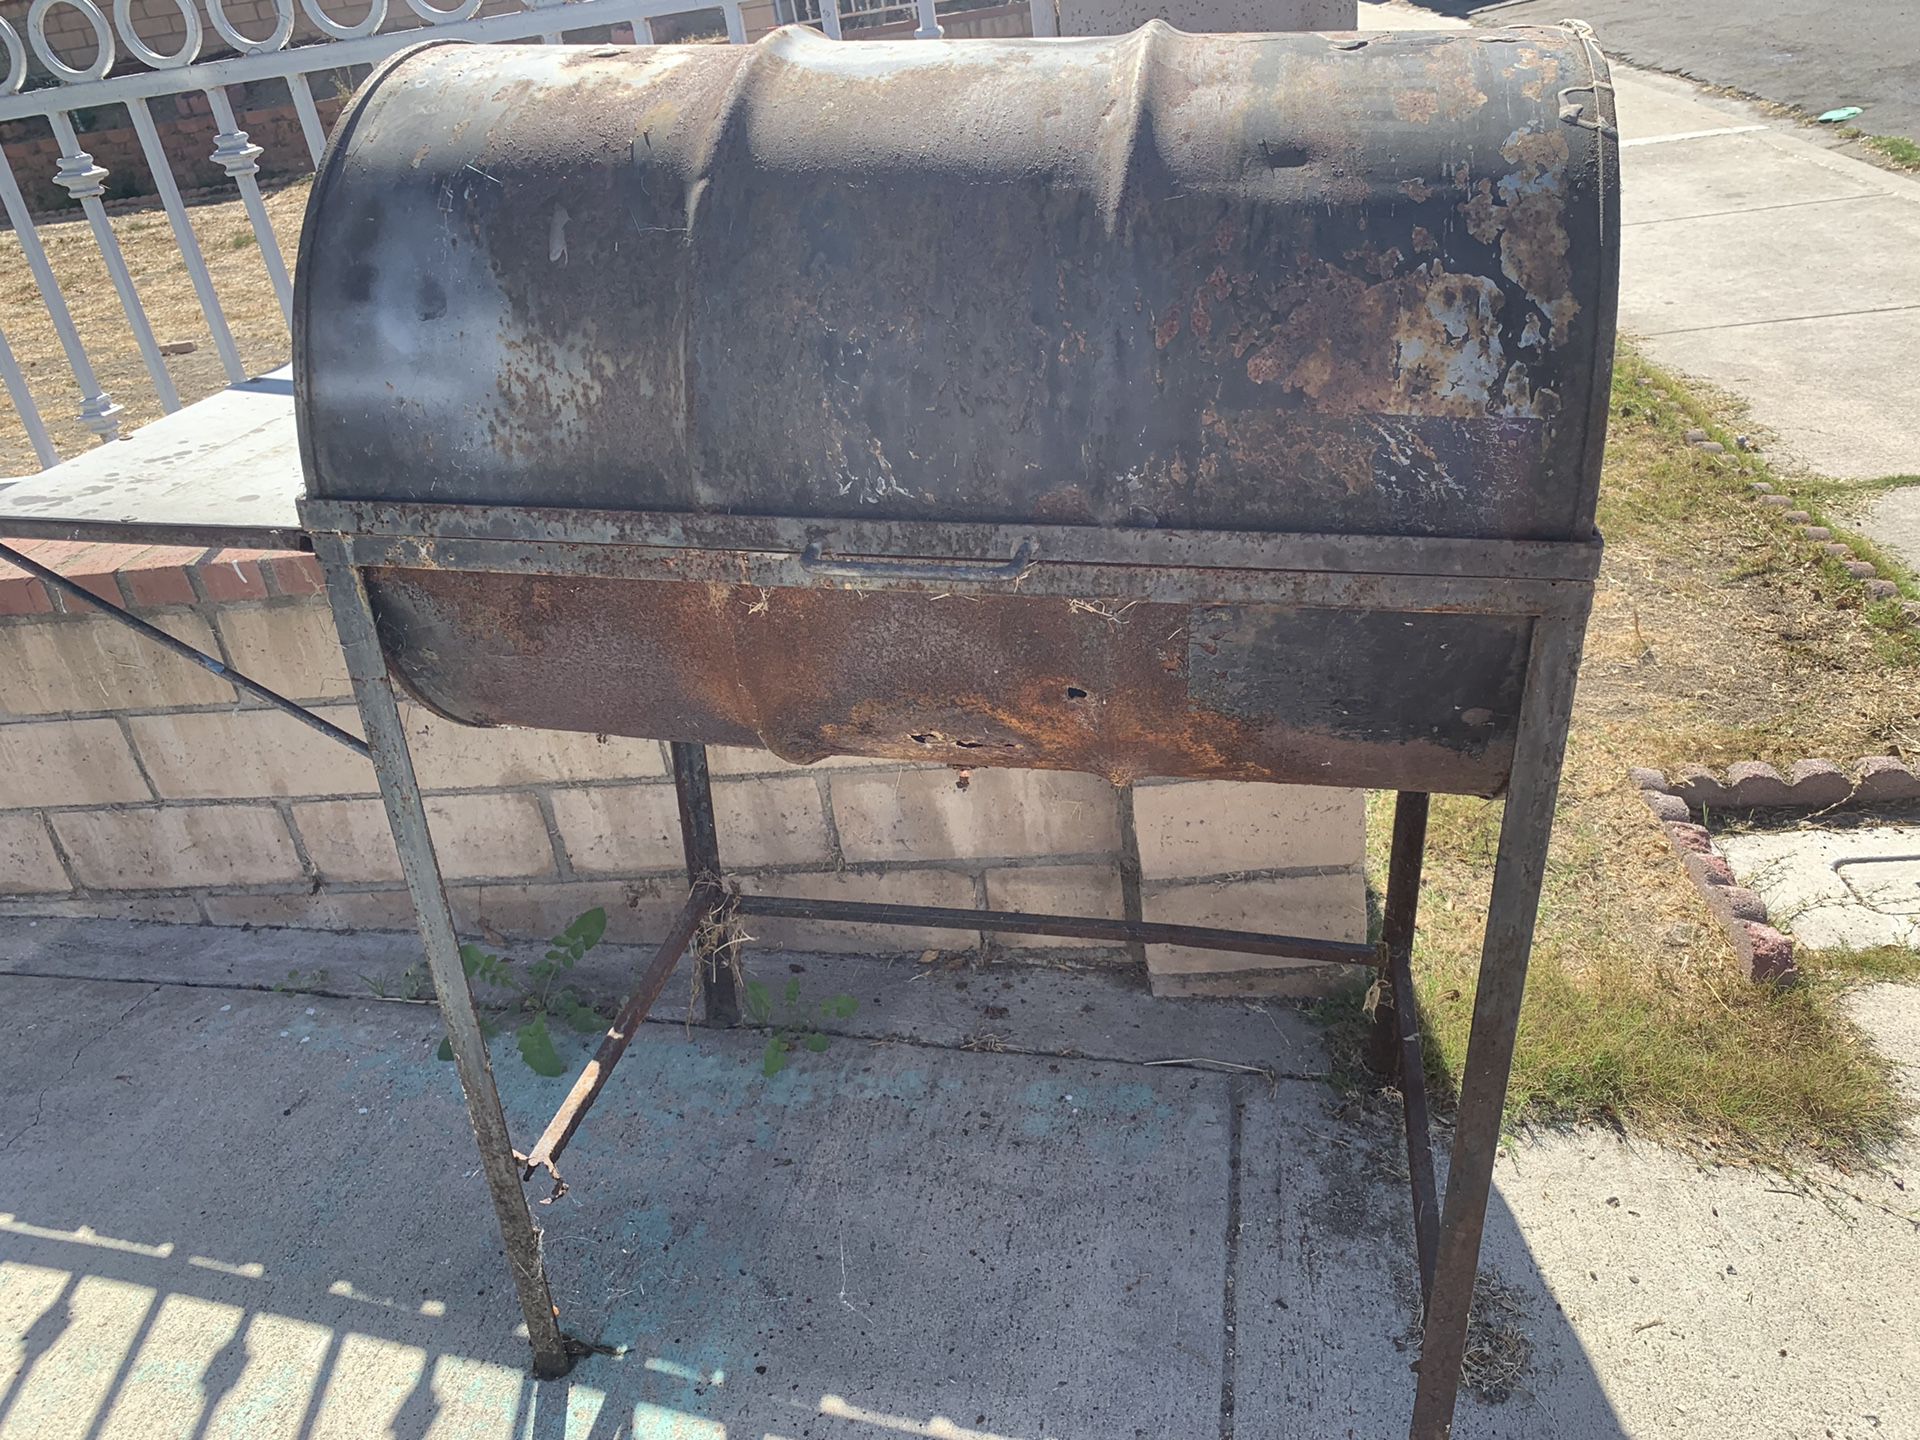 Grill FREE PARADISE HILLS AREA FREE